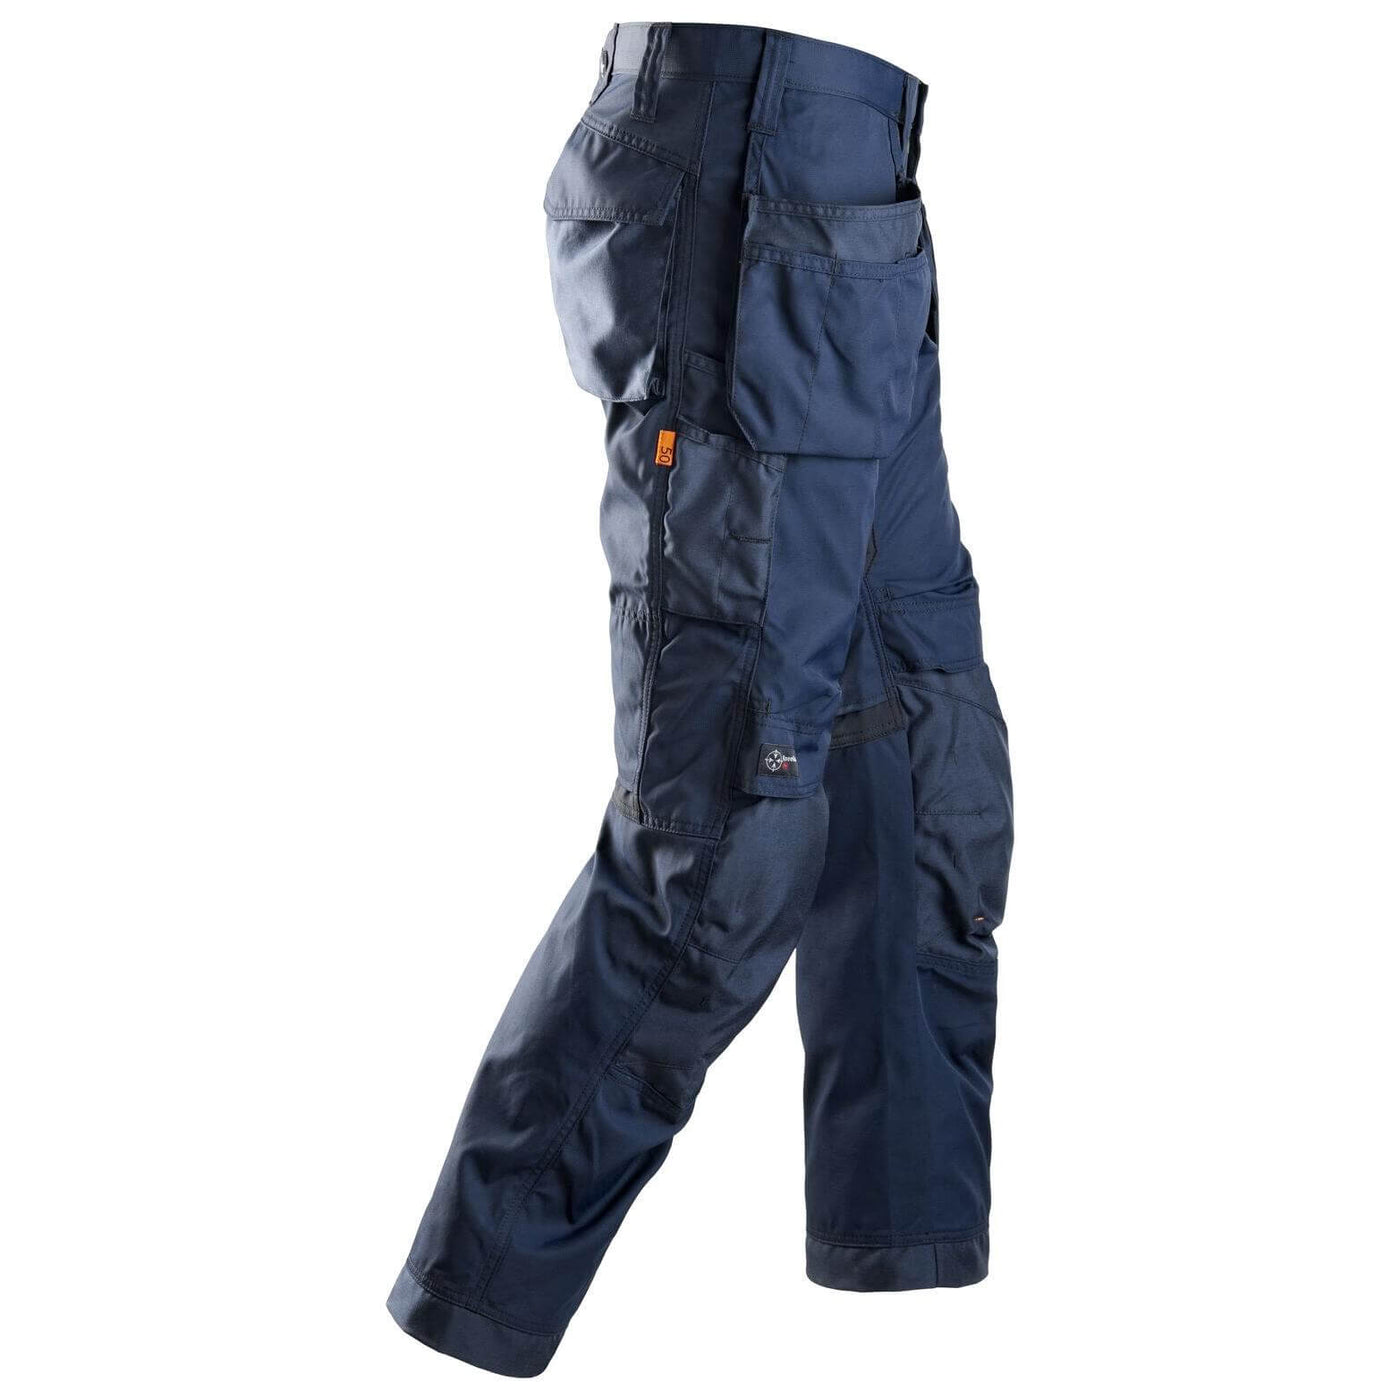 Snickers 6201 AllroundWork Work Trousers Holster Pockets Navy Navy right #colour_navy-navy